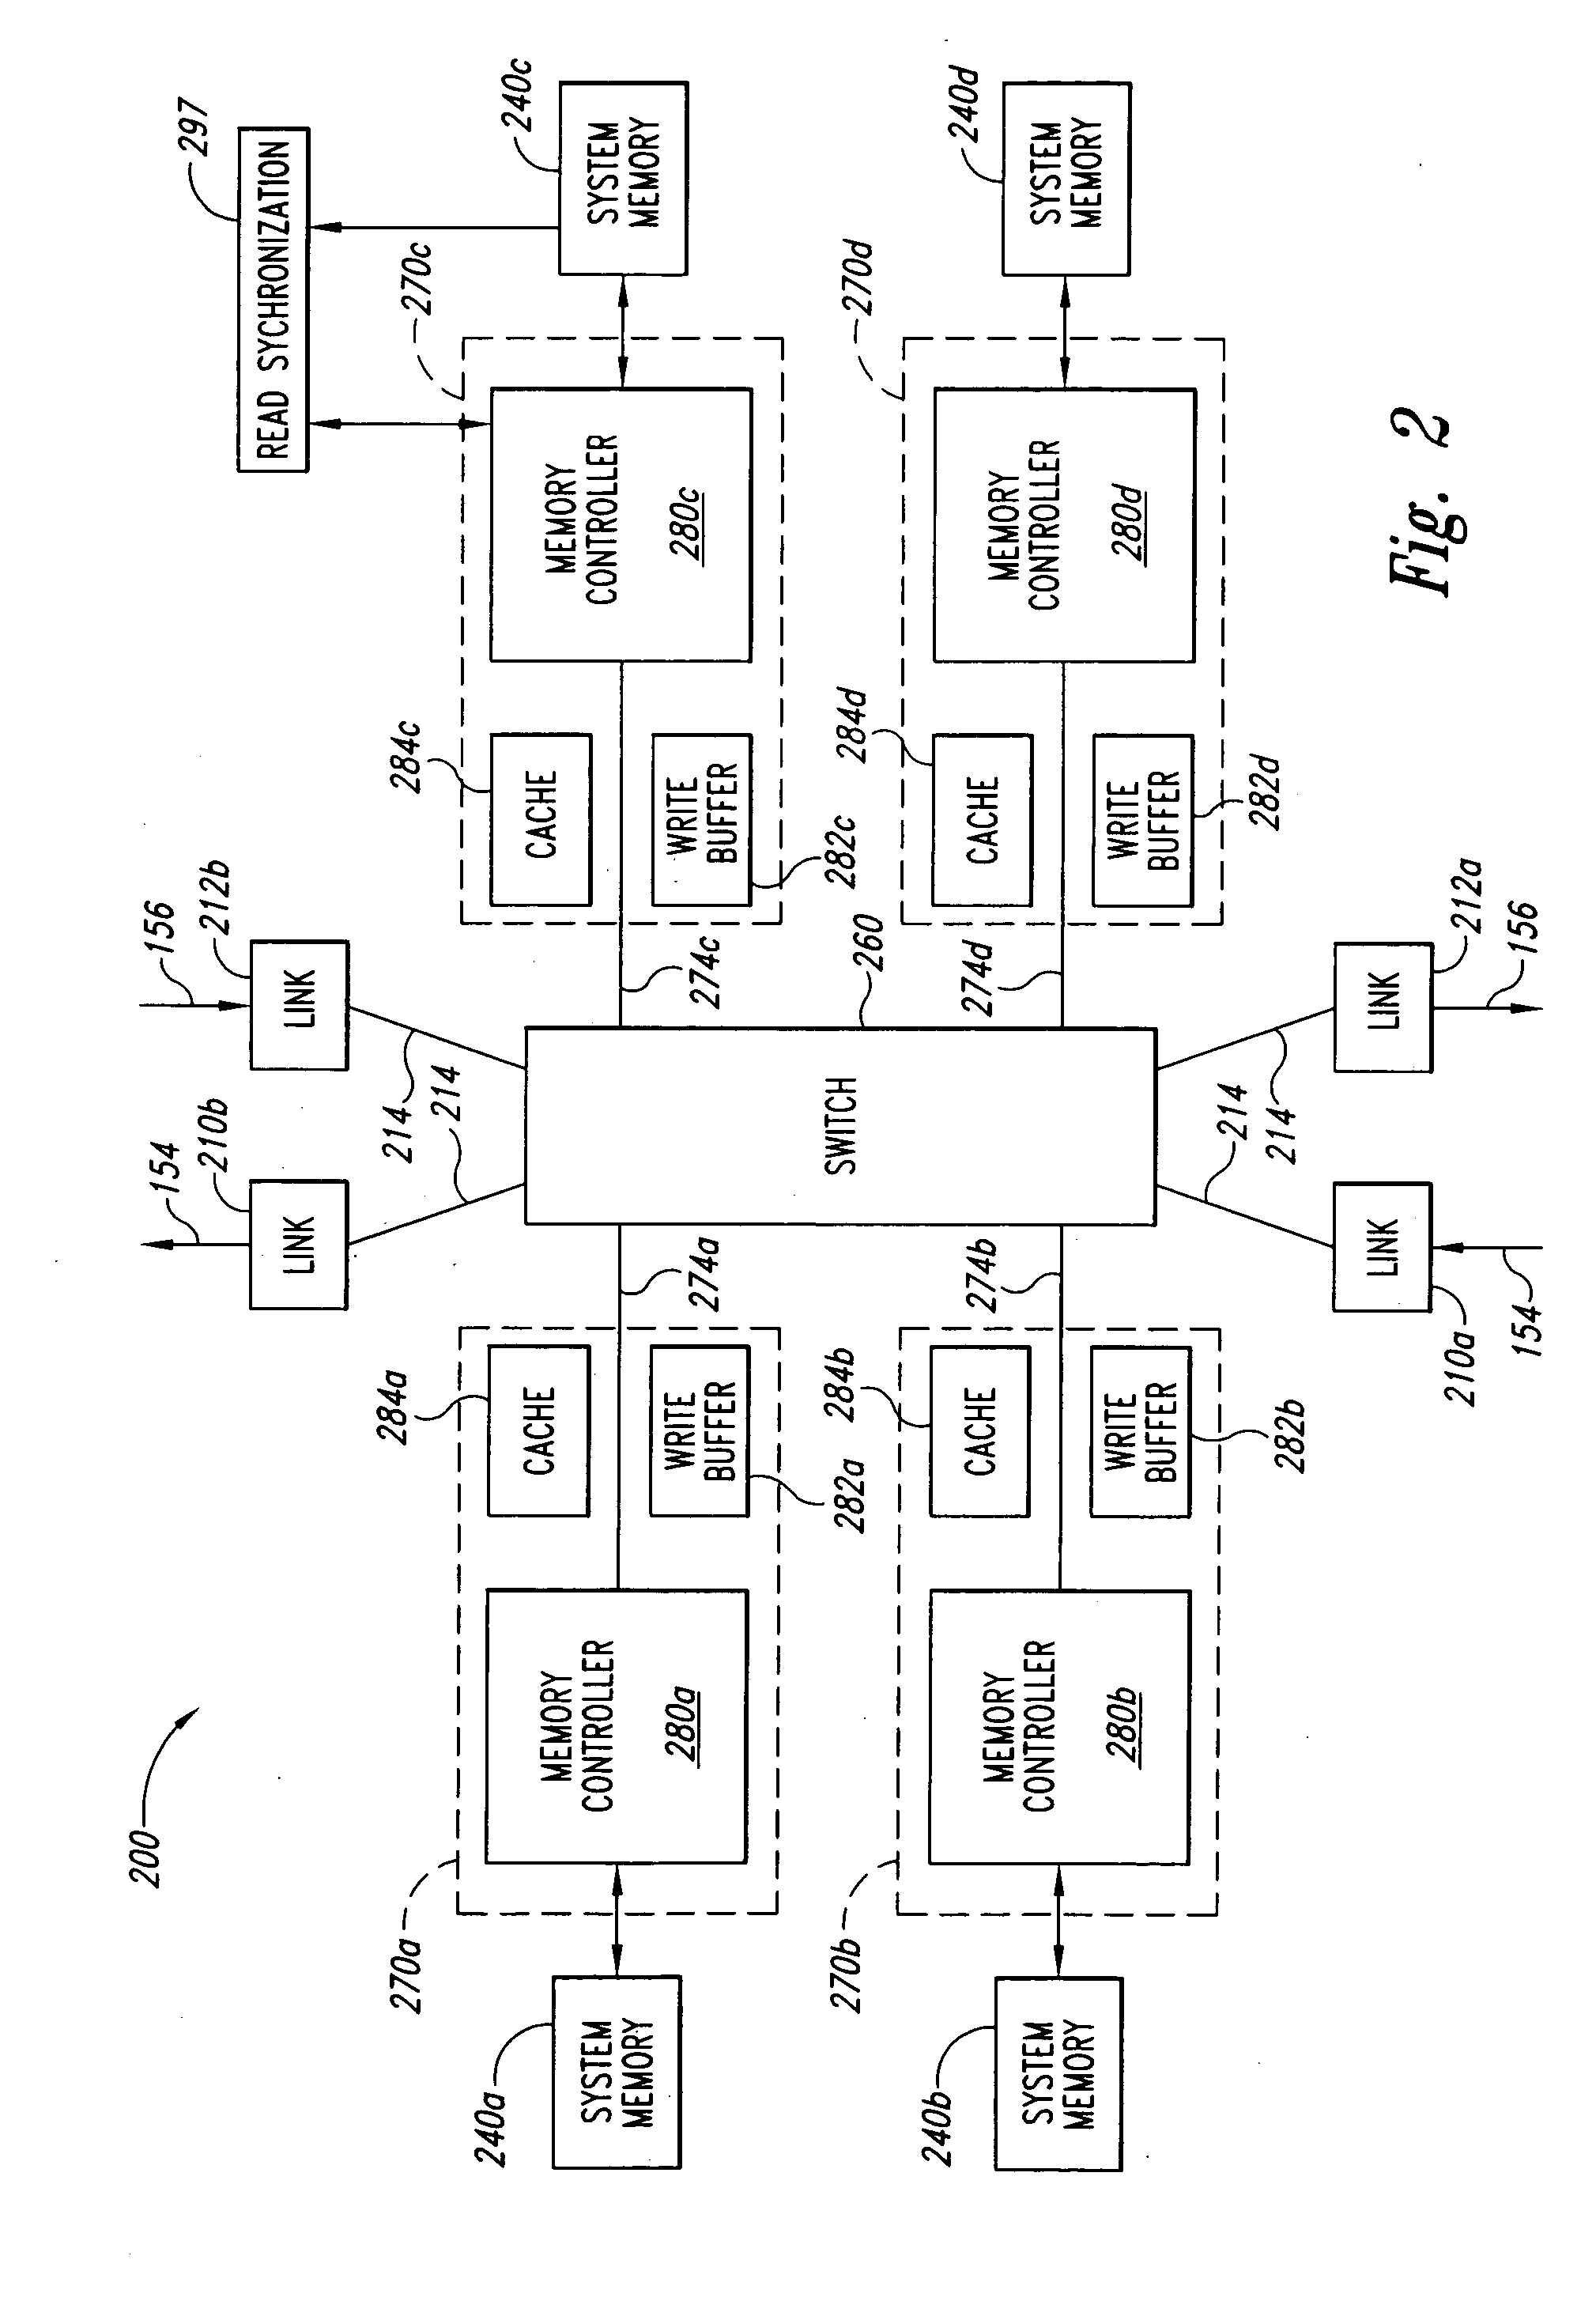 System and method for an asynchronous data buffer having buffer write and read pointers